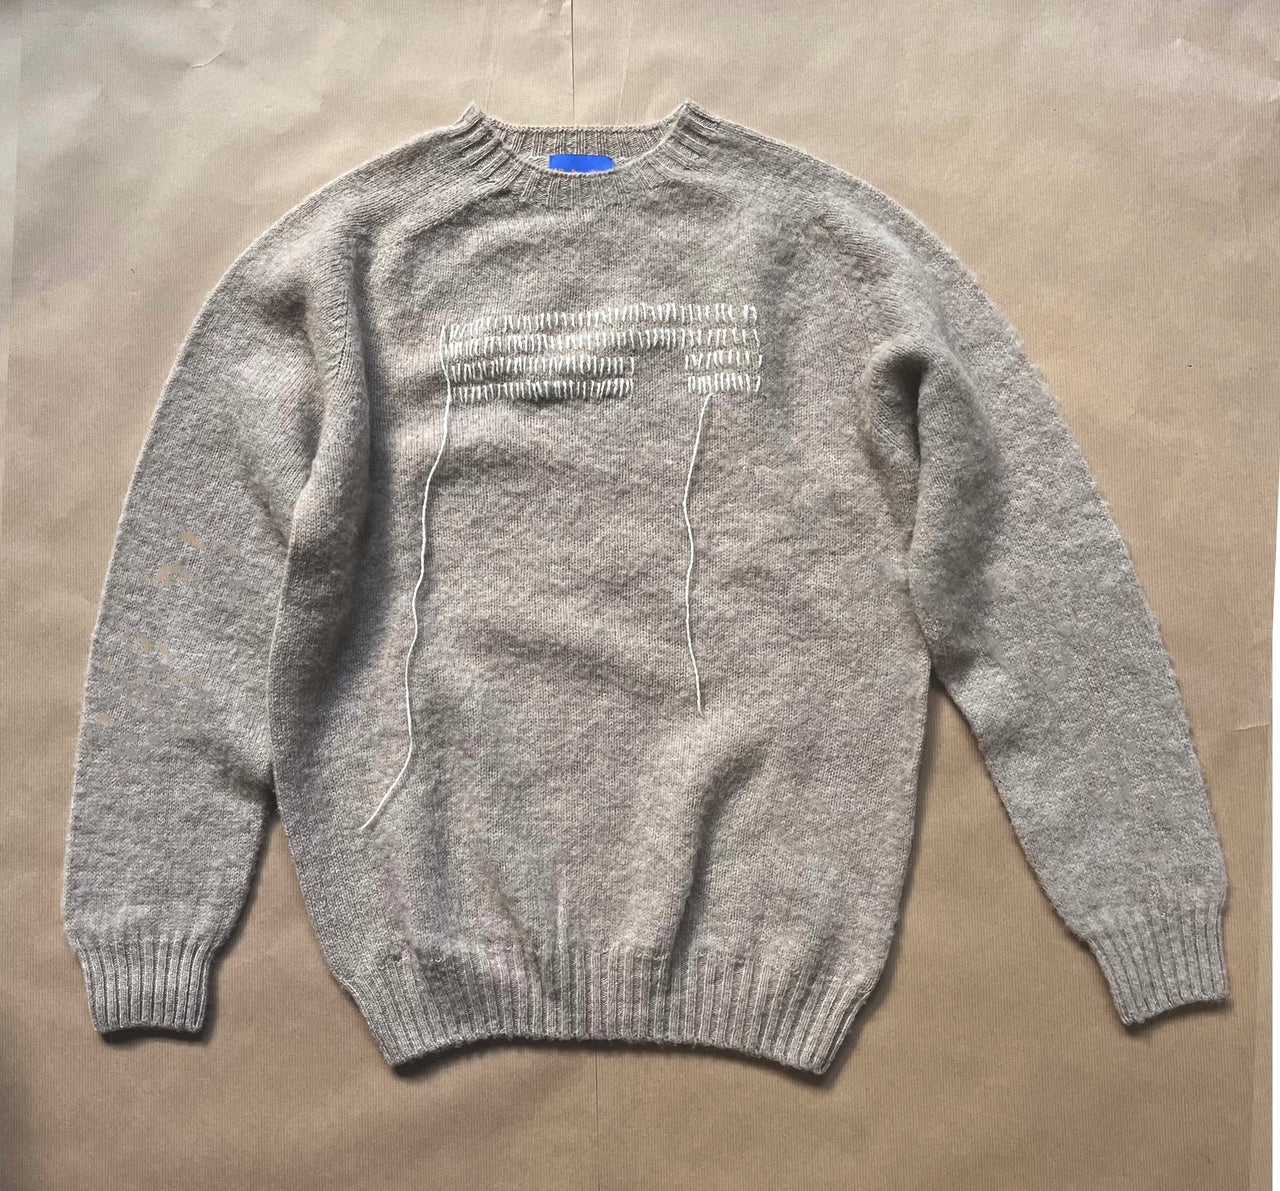 Oversized sweater with hand embroidery oatmilk track